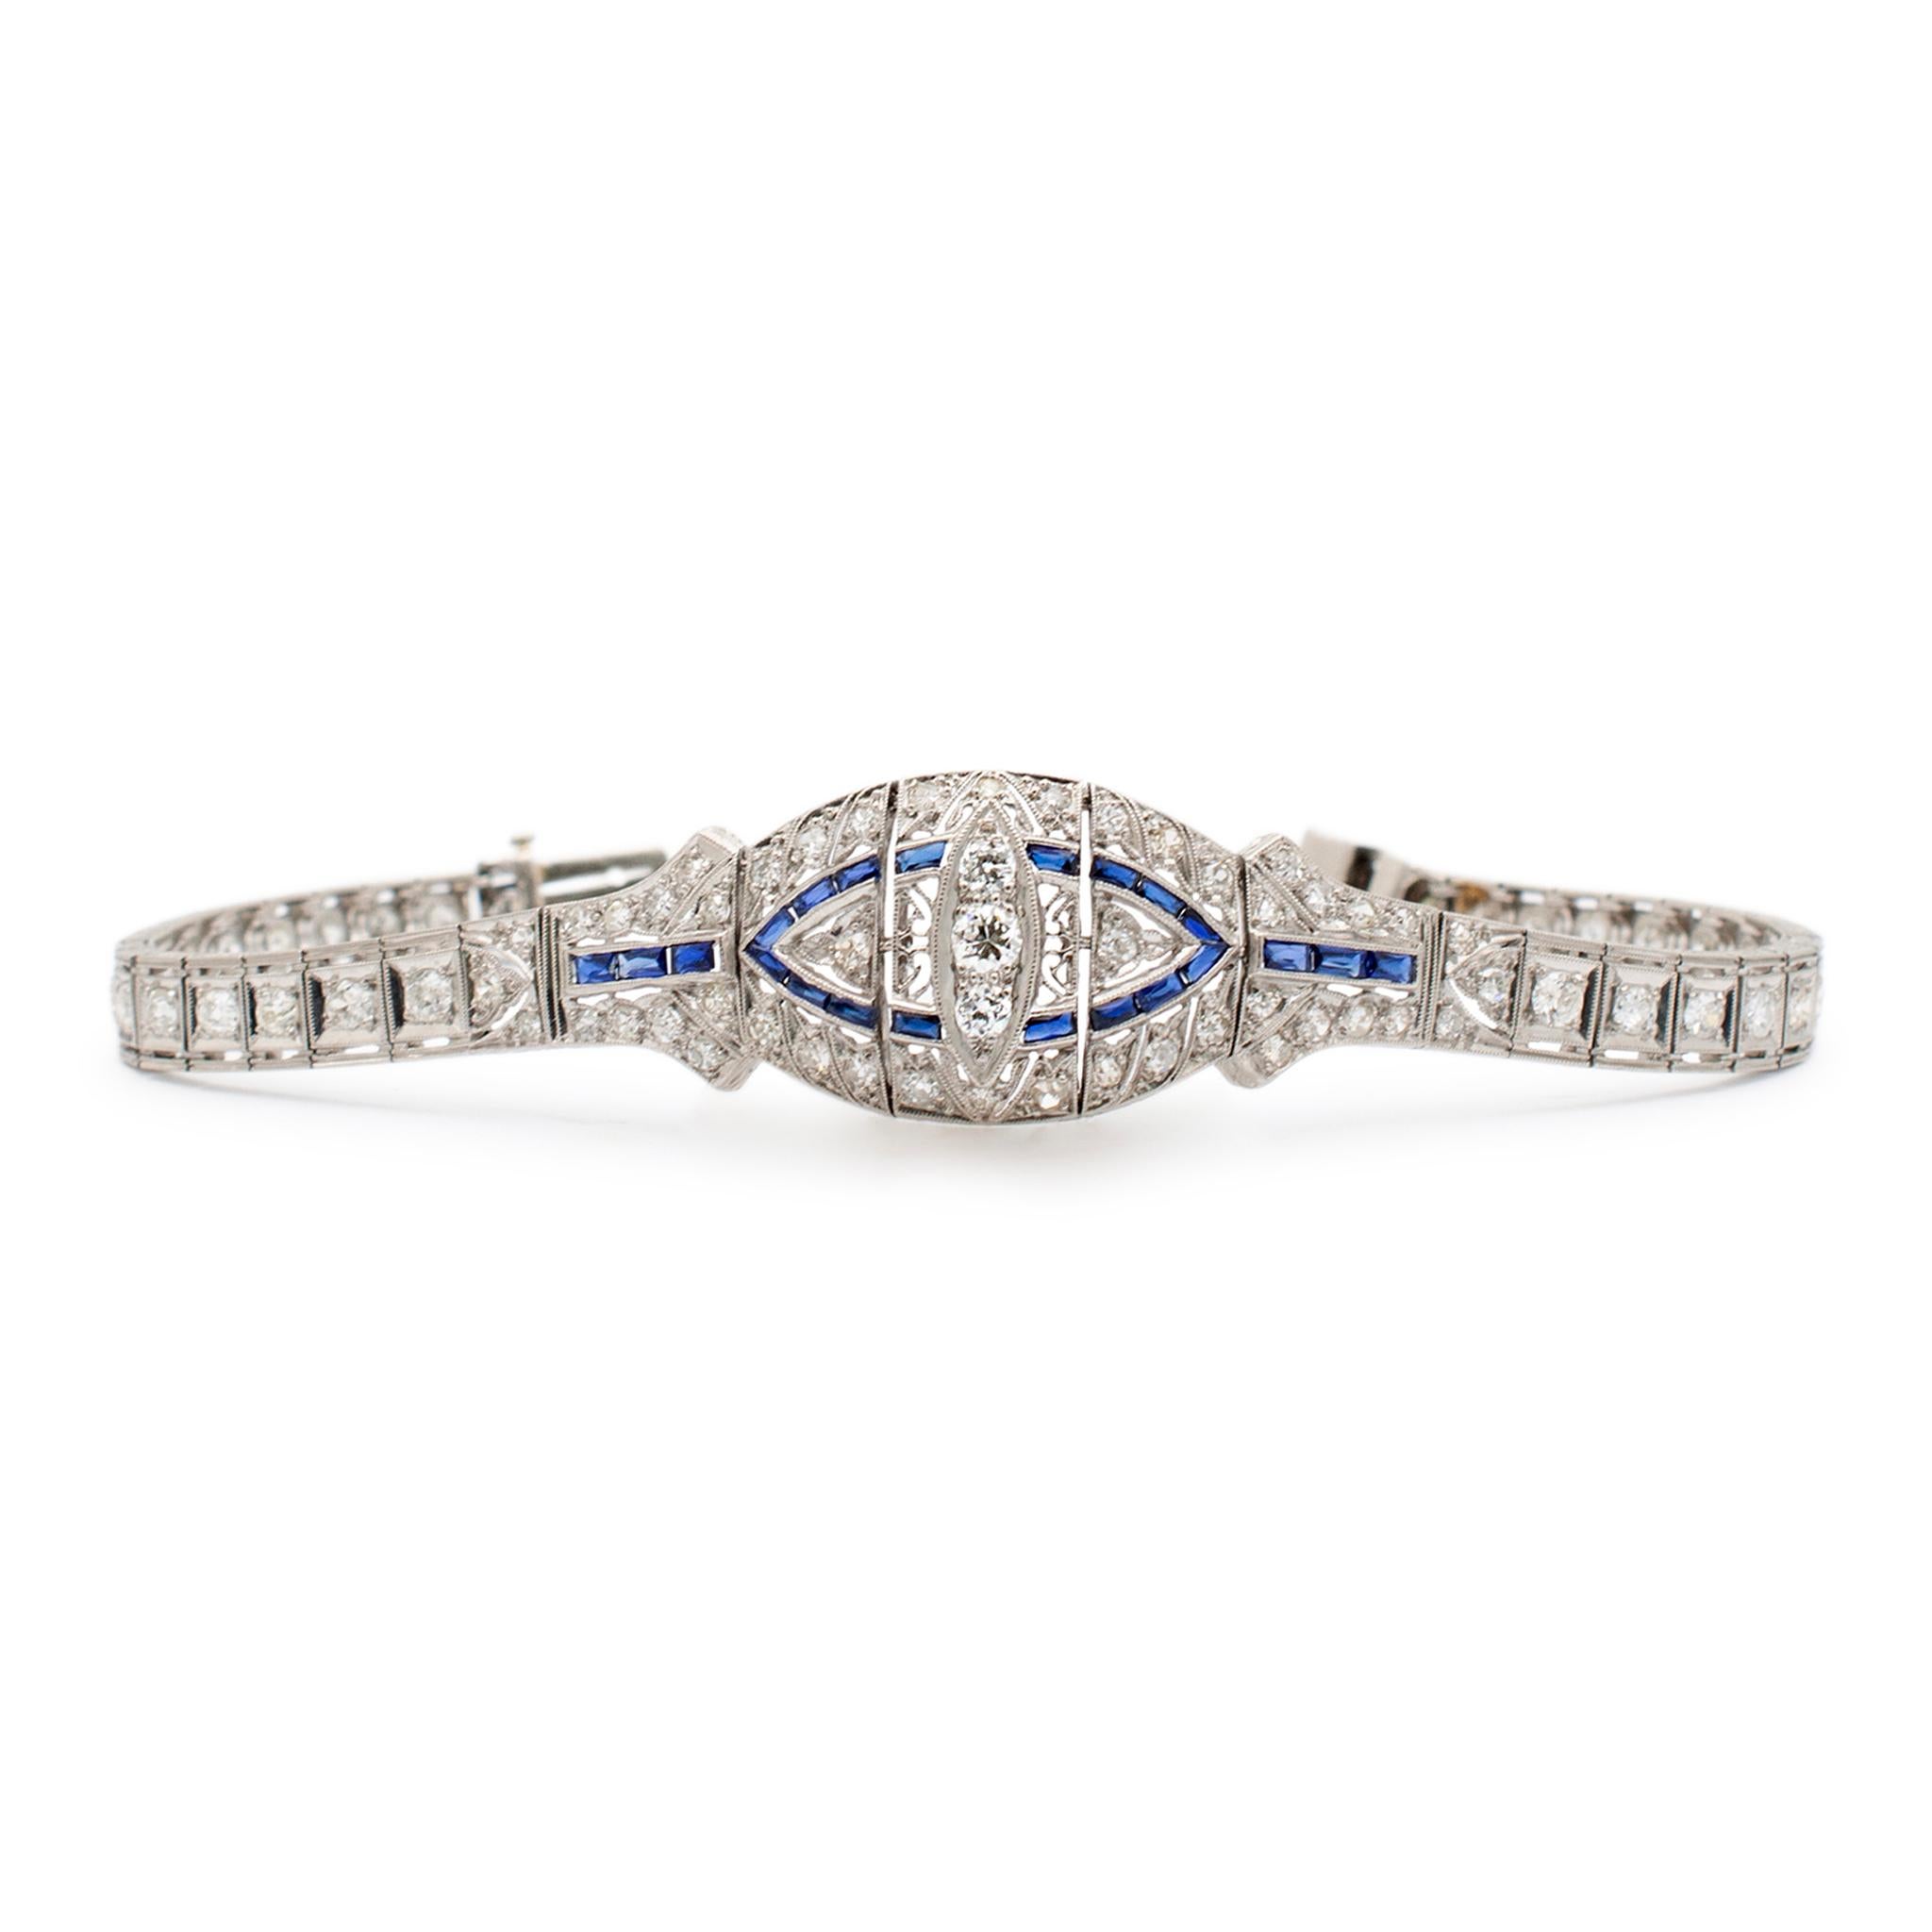 Gender: Ladies

Metal Type: Platinum

Length: 7.00 Inches

Width: 17.70 mm tapering to 4.95 mm

Weight: 19.89 grams

Ladies filigreed 900 platinum diamond and sapphire bracelet. The metal was tested and determined to be 900 platinum.

Pre-owned in